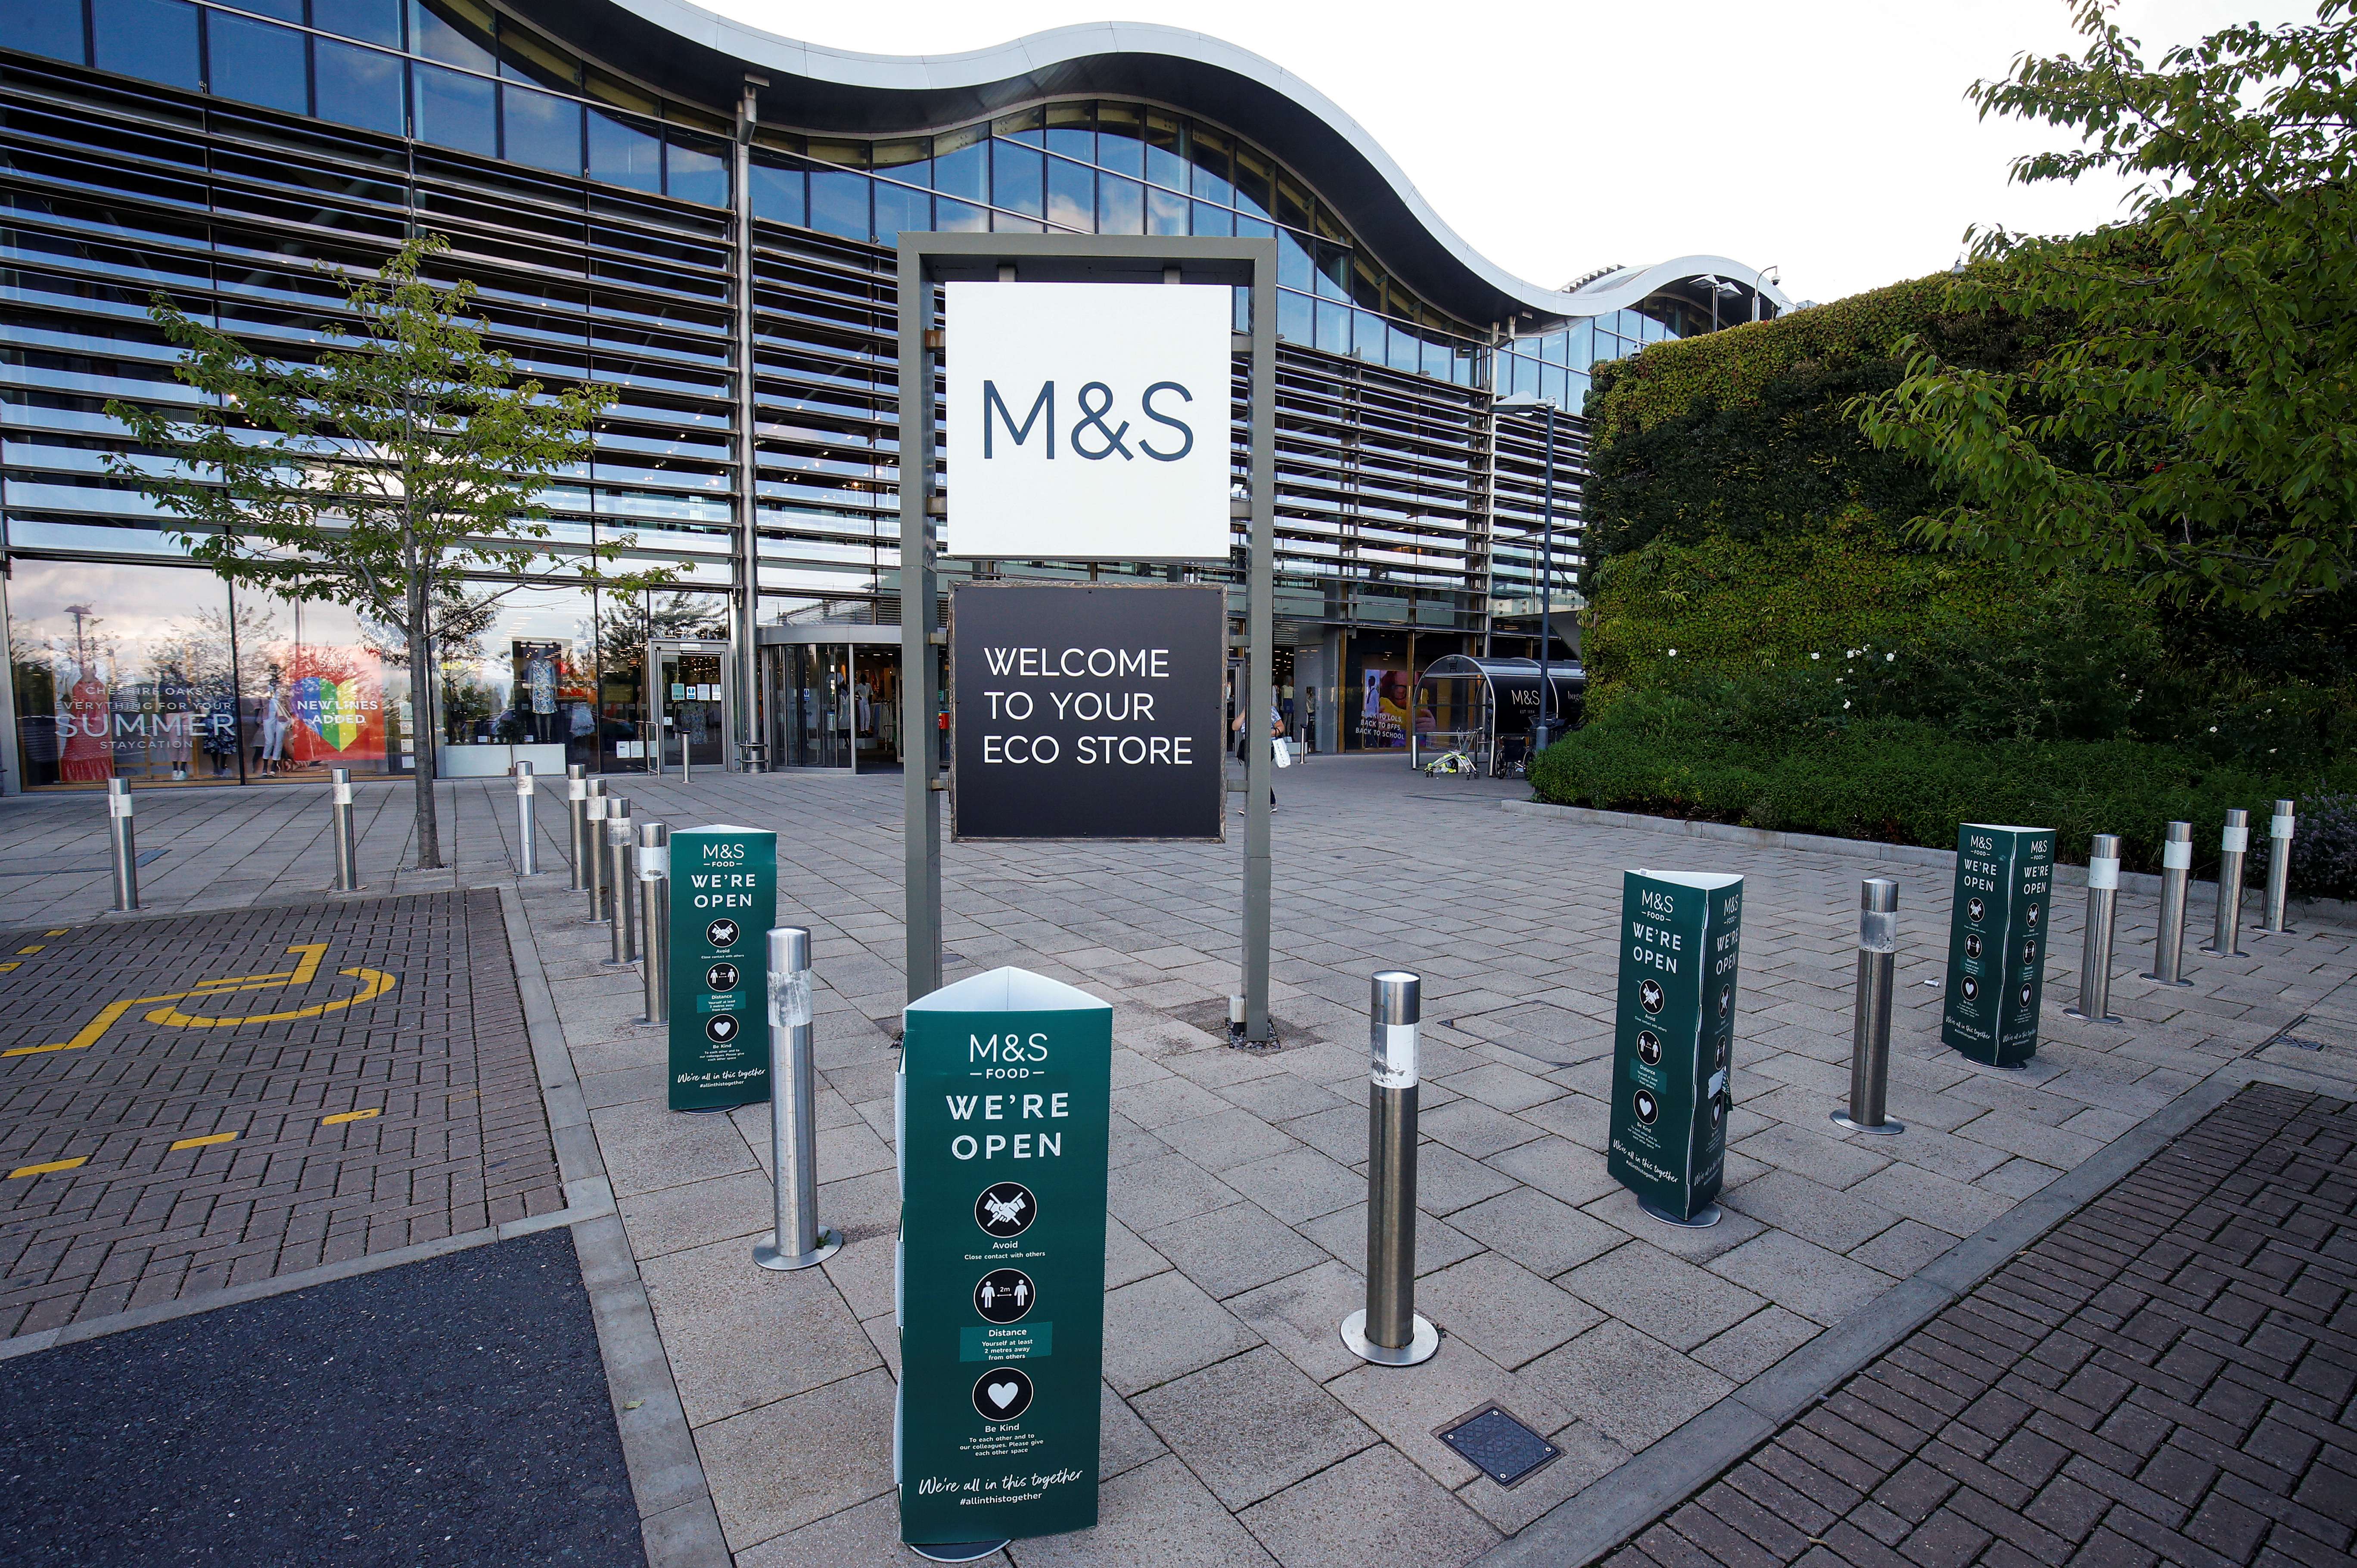 A Marks and Spencer (M&S) logo is seen on the outside of a store in Cheshire